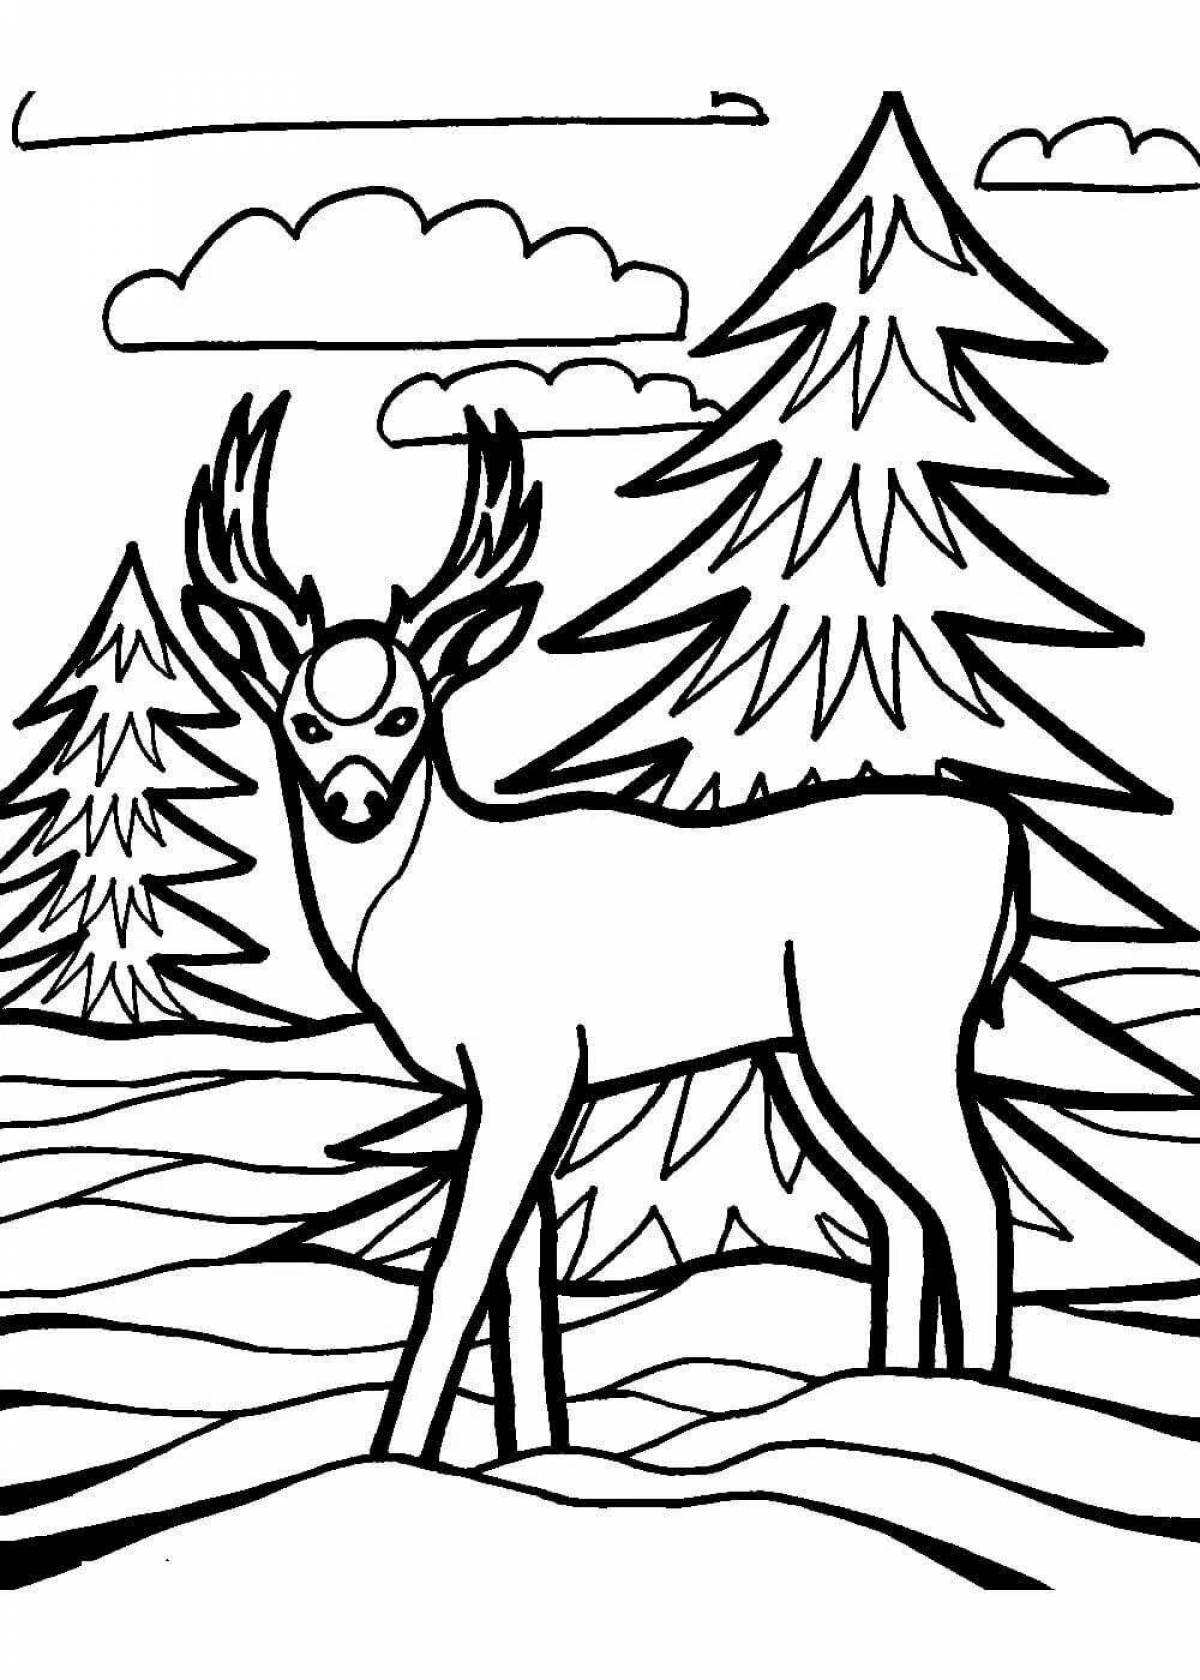 Fun coloring animals in the forest